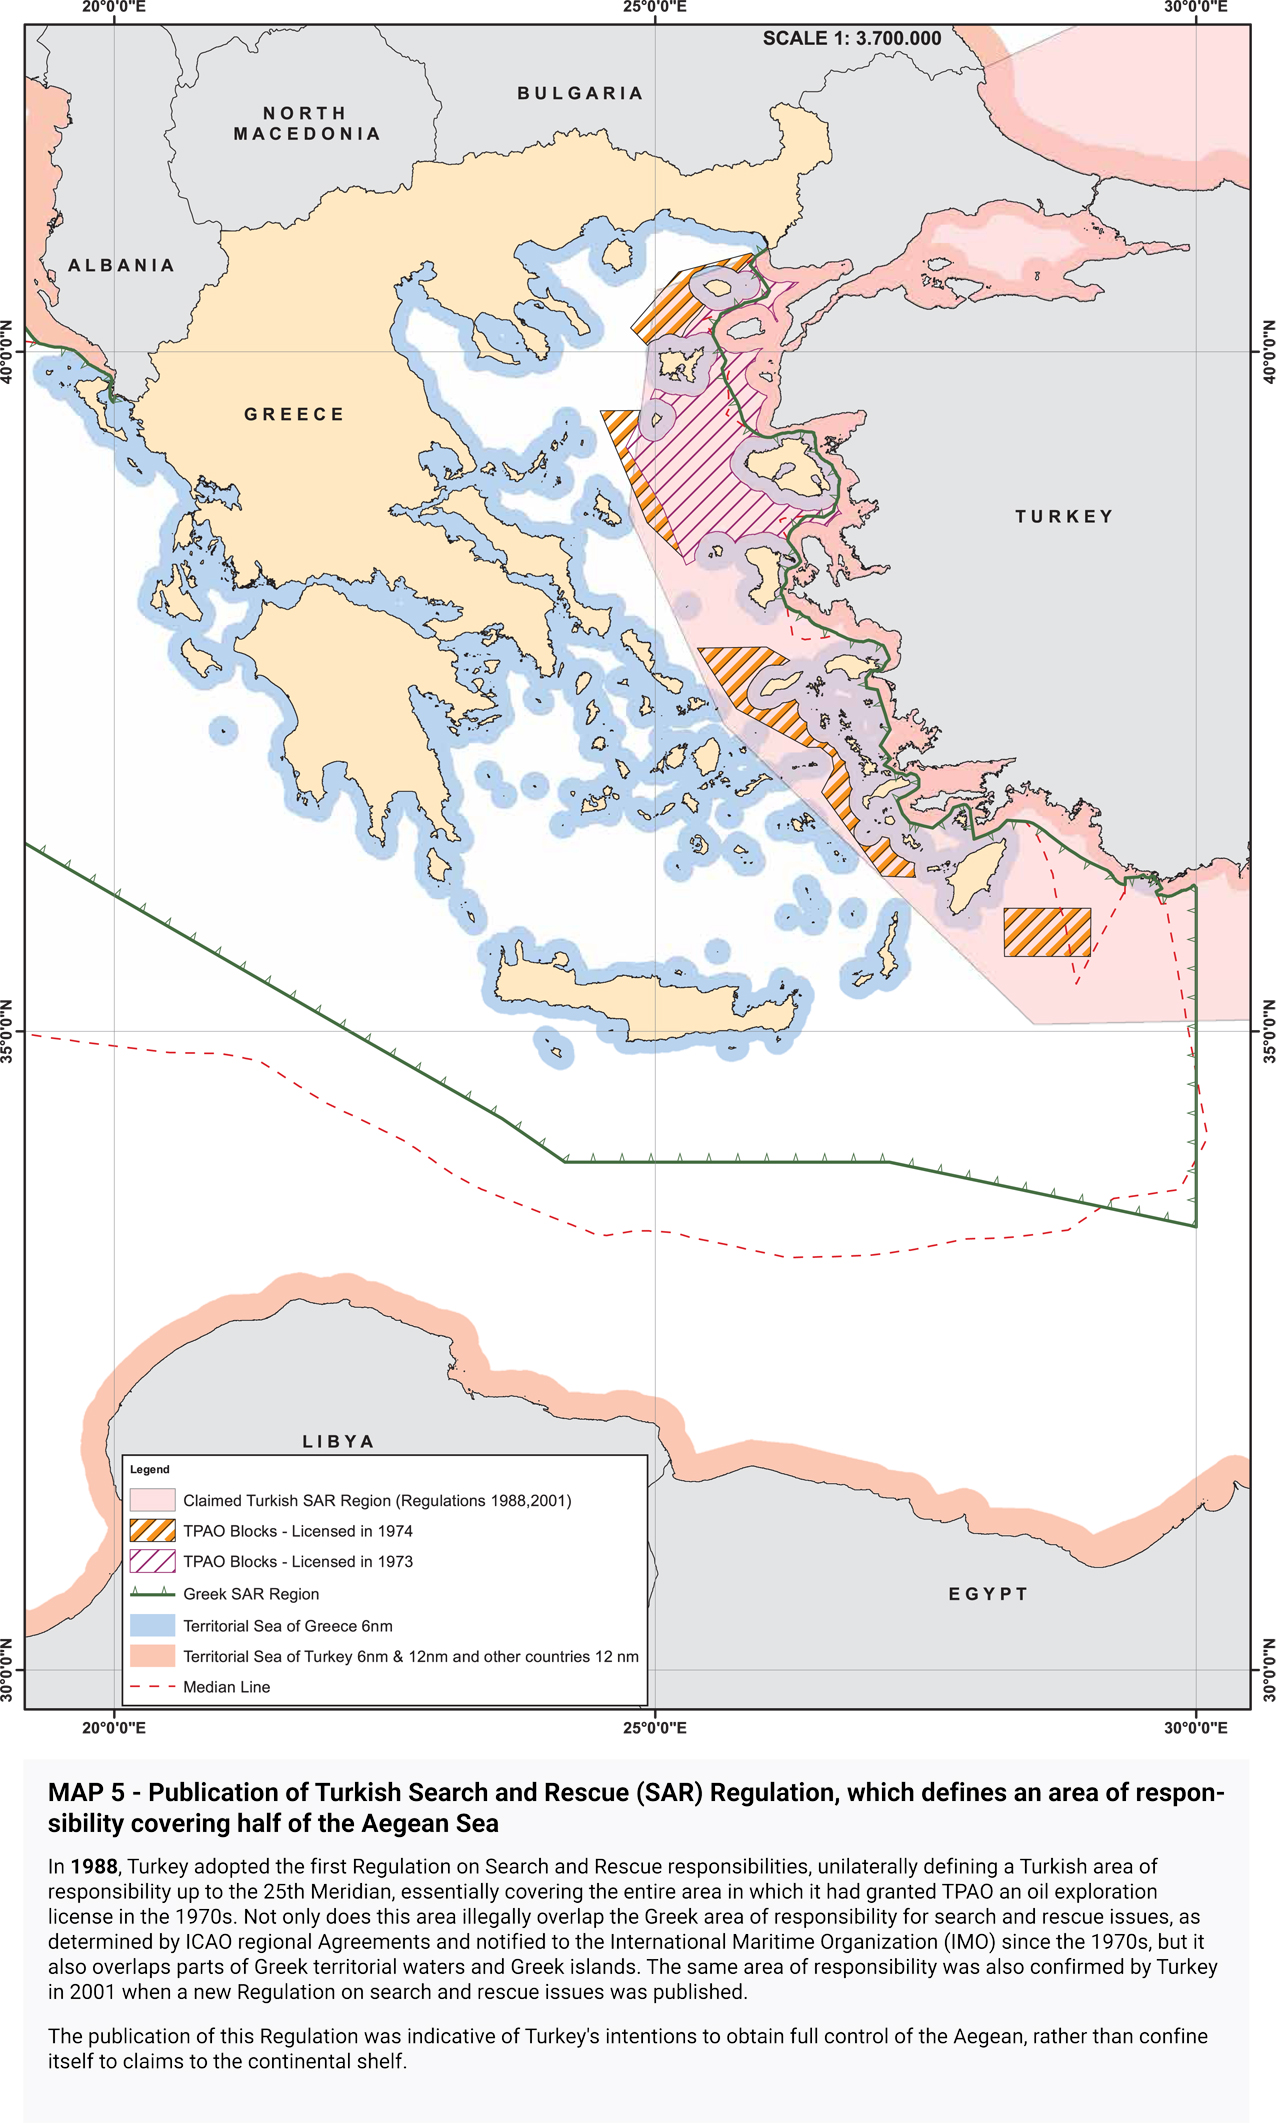 greece-responds-to-turkish-claims-about-islands-with-maps9